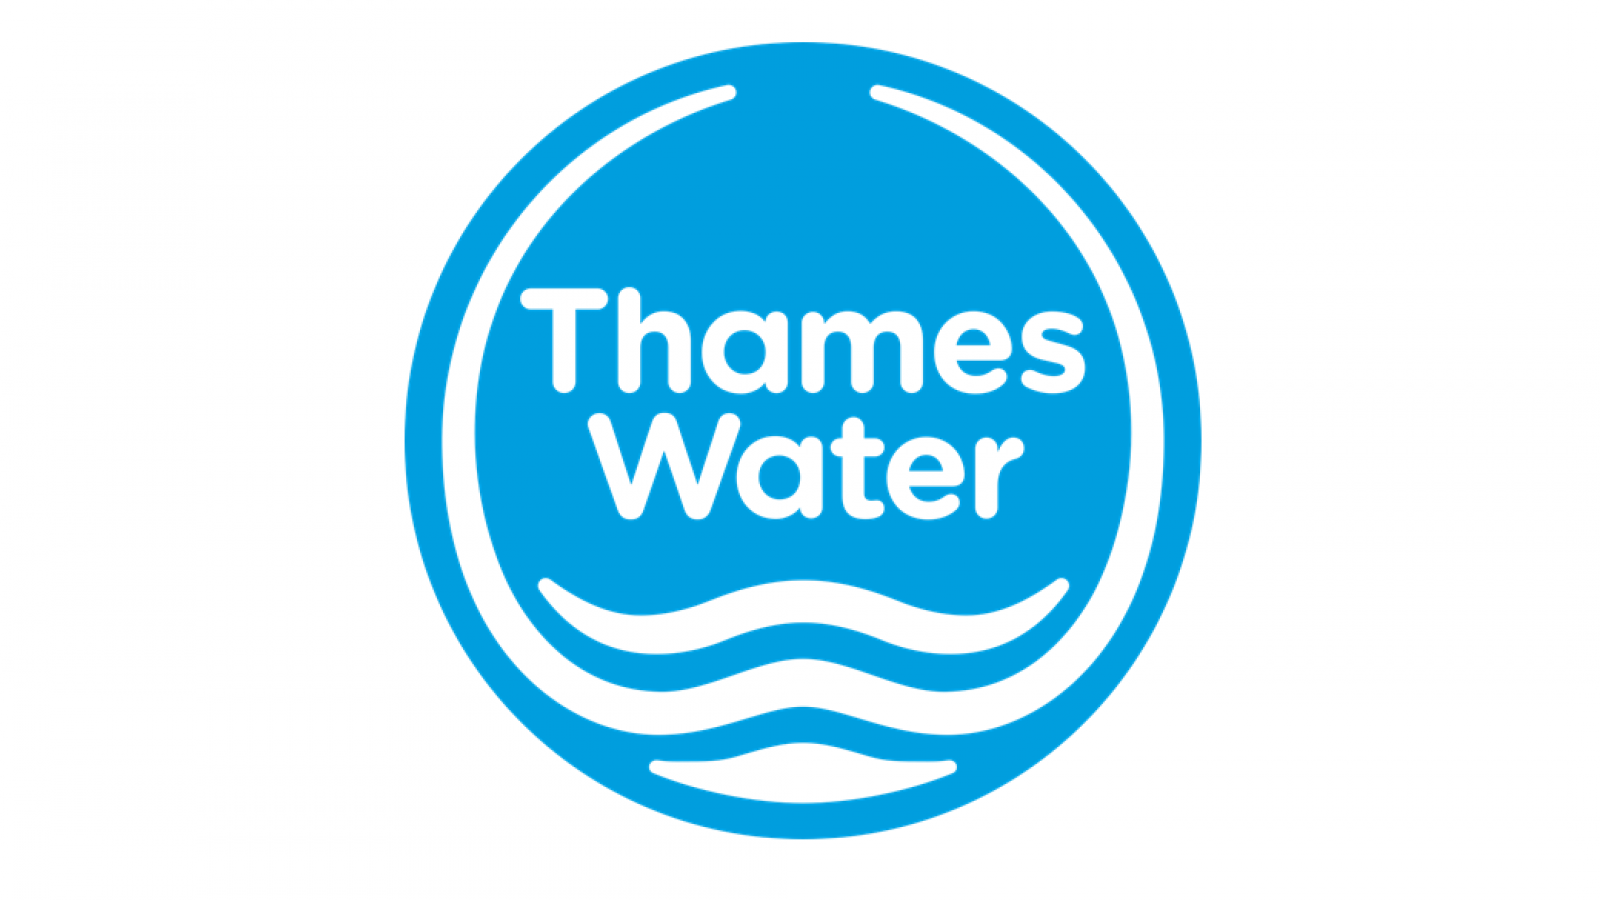 Thames Water - Lifecycle Framework